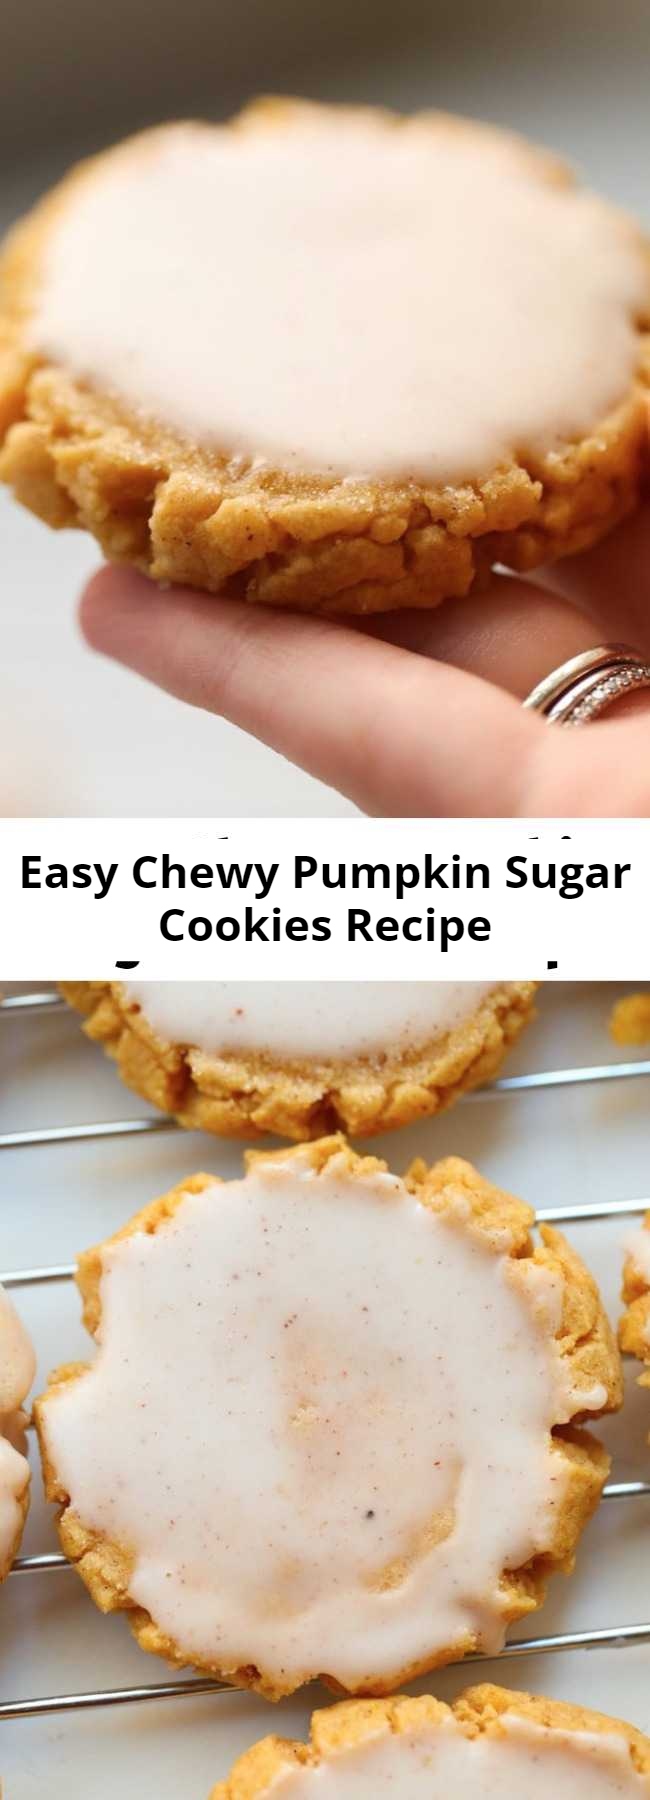 Easy Chewy Pumpkin Sugar Cookies Recipe - Sugar Cookies just got better with a little pumpkin! This recipe creates soft, chewy, lightly spicy glazed pumpkin sugar cookies that are perfect for Fall!